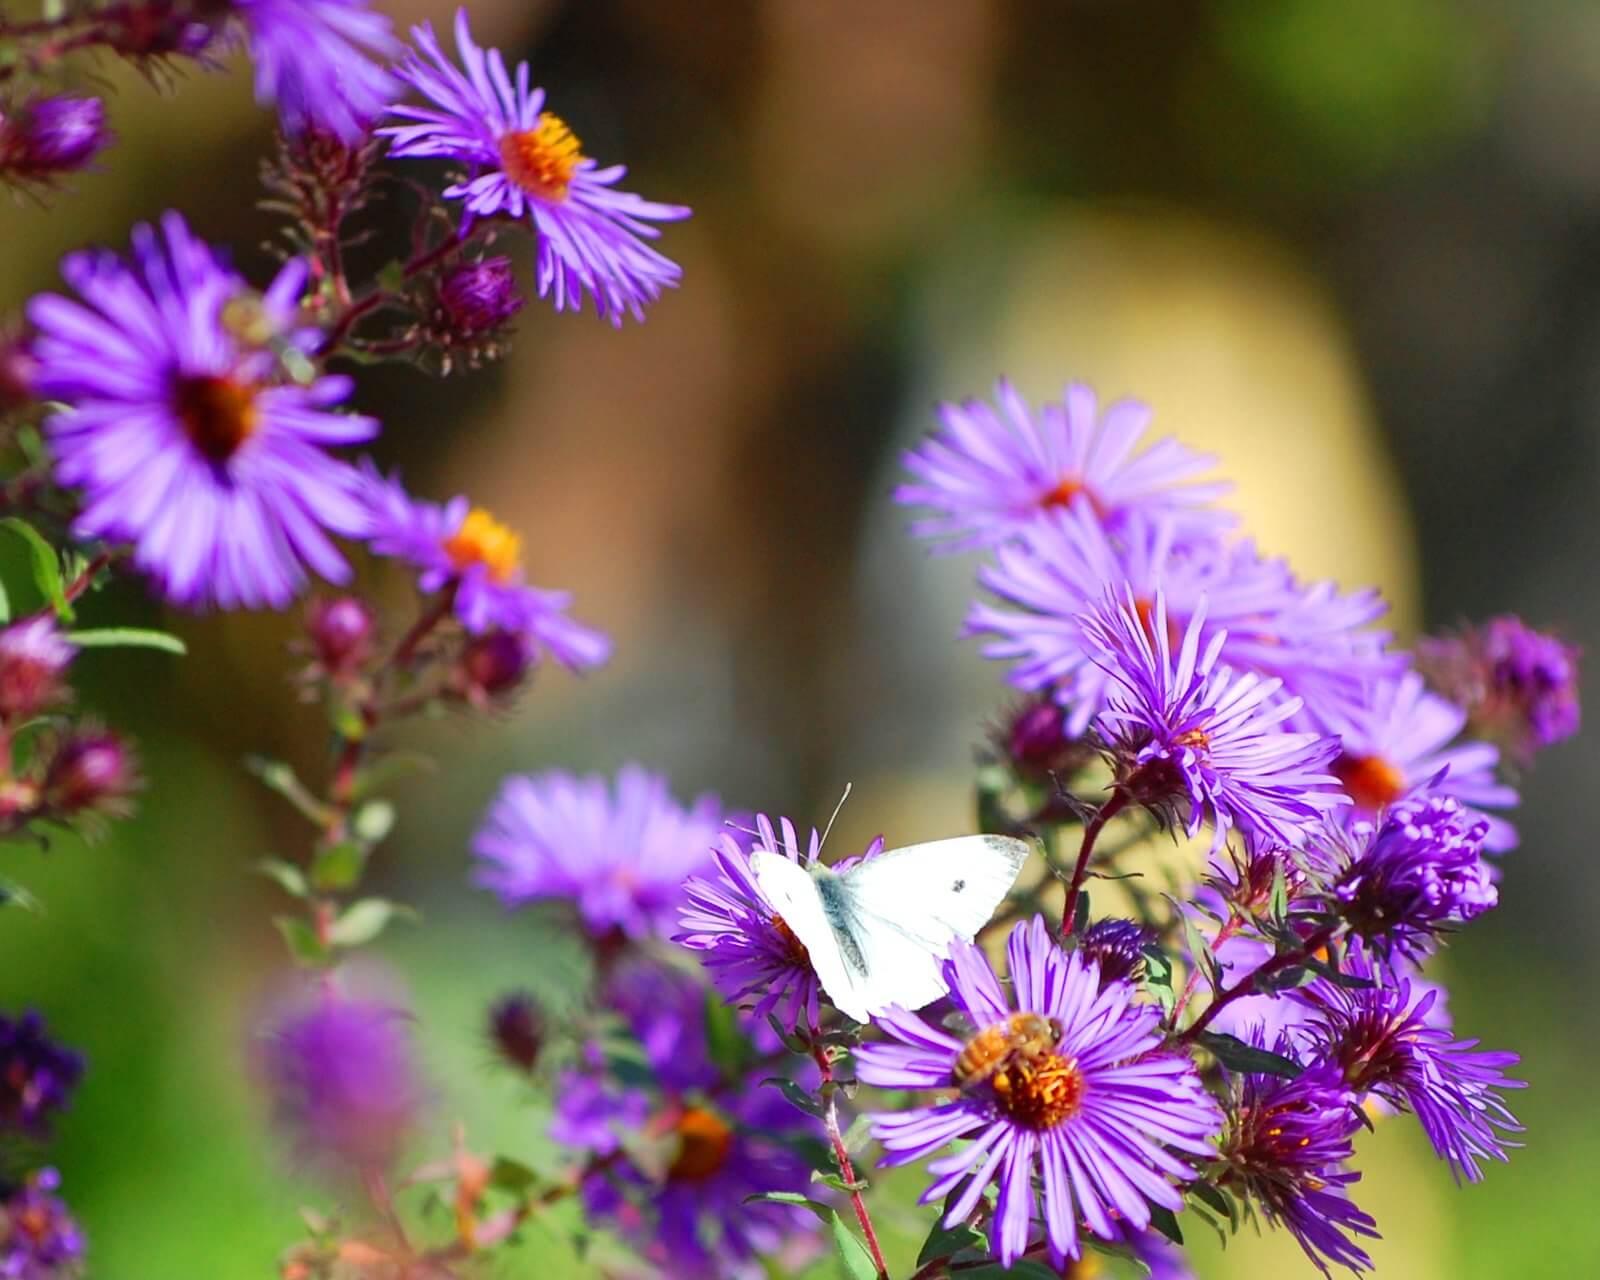 Knowles-Nelson Stewardship Program - purple aster flowers visited by a small white butterfly and honeybee